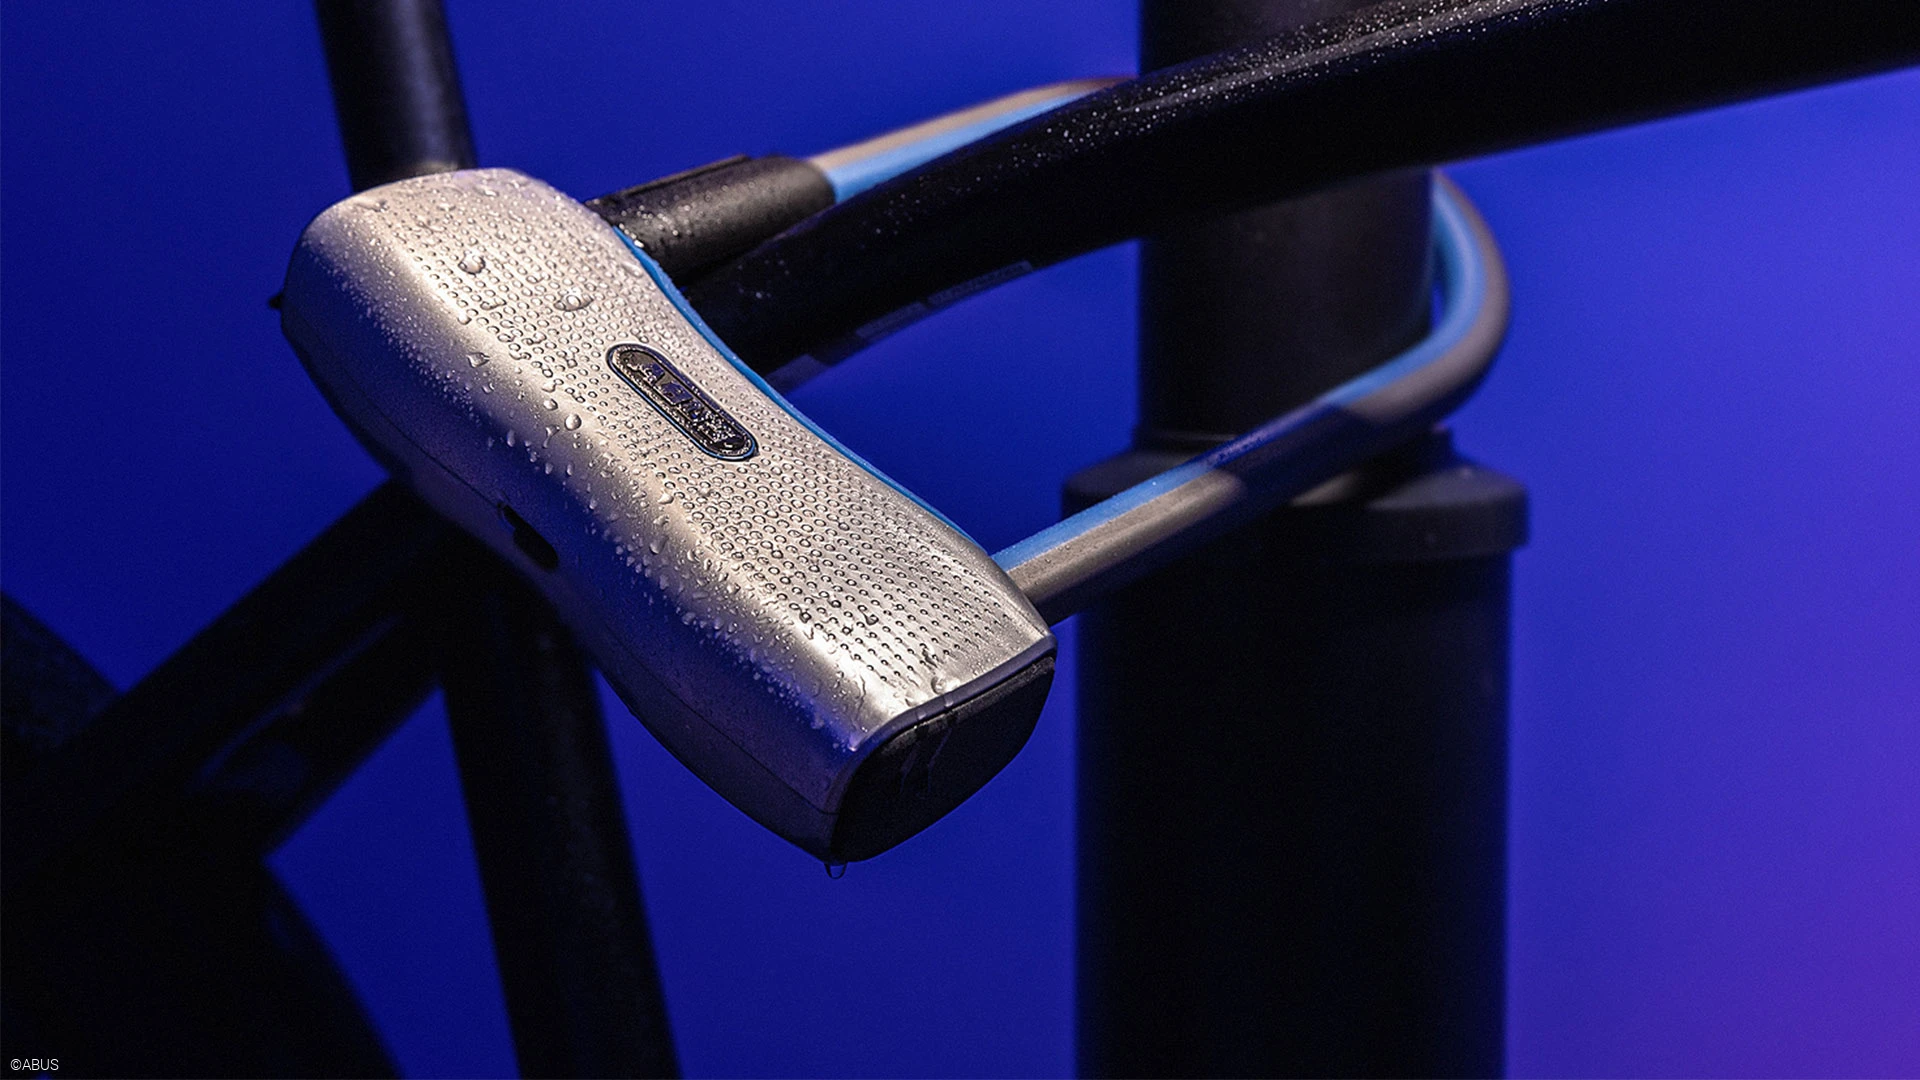 Smart bike lock: How to secure your bike with Bluetooth, alarm or app